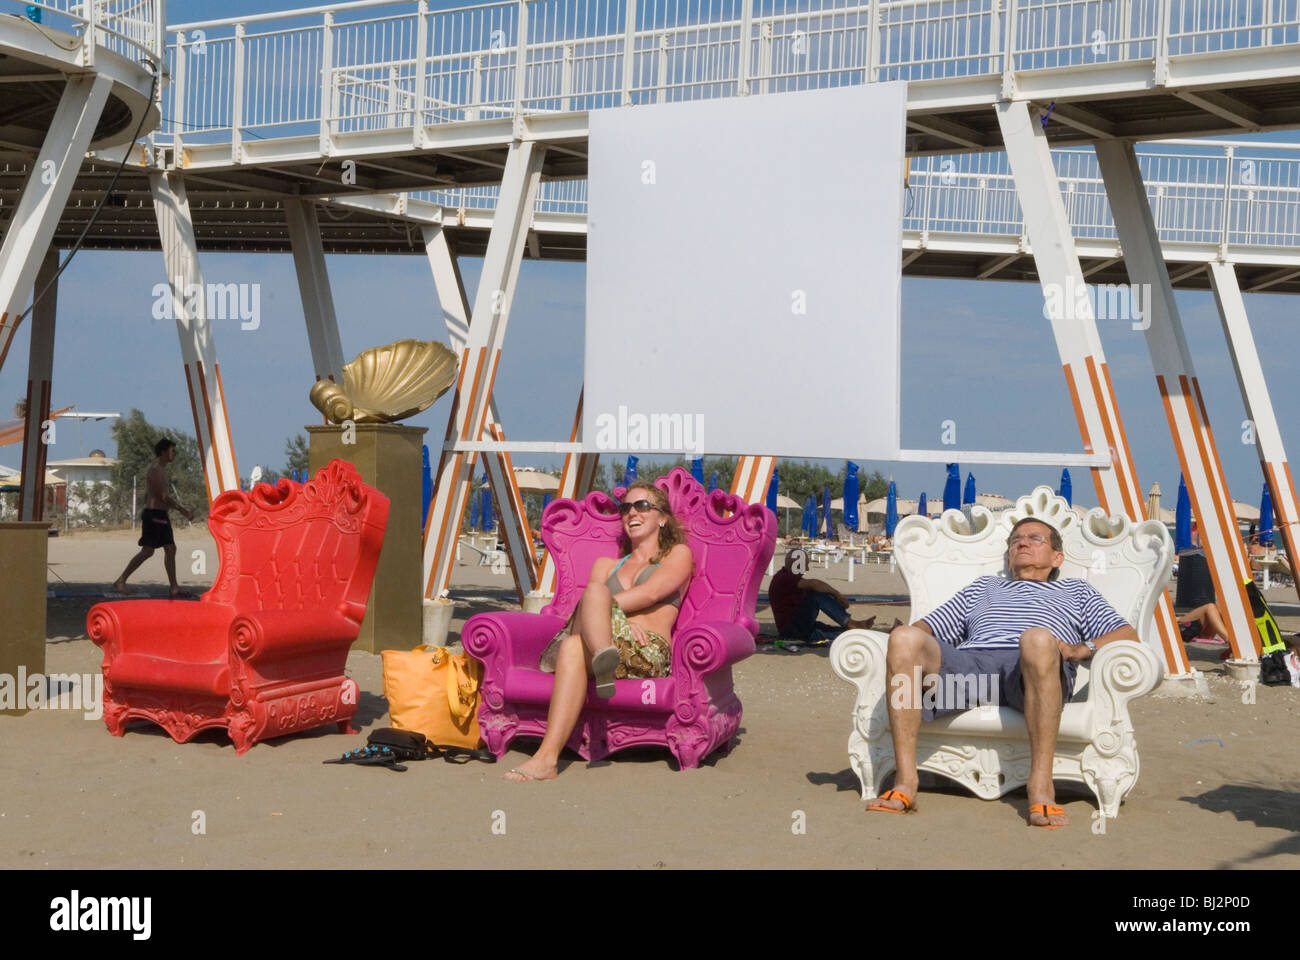 Venice Lido the Blue Moon public beach. Tourists having fun in large plastic chairs. Venice Italy 2009 2000s HOMER SYKES Stock Photo